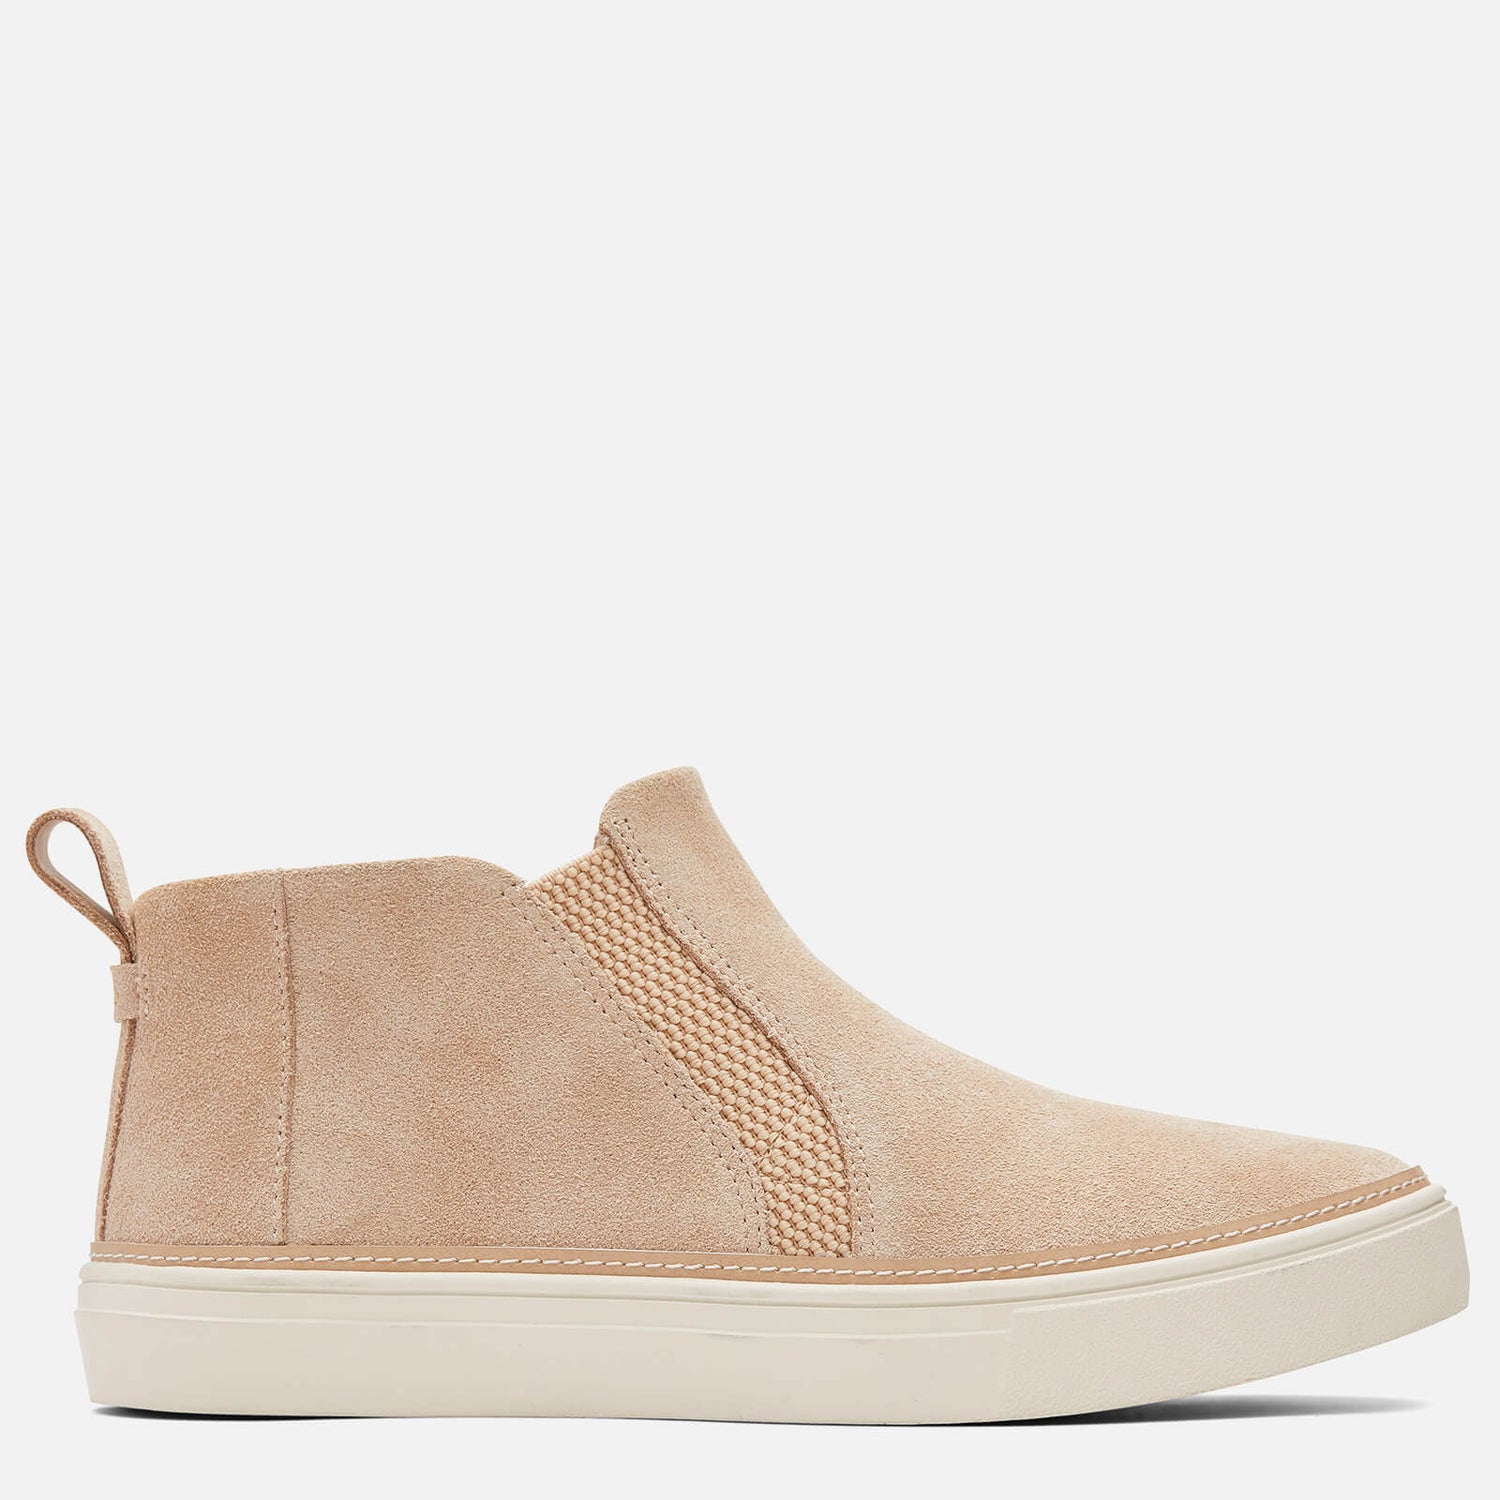 TOMS Women's Bryce Suede Ankle Boots - Sand